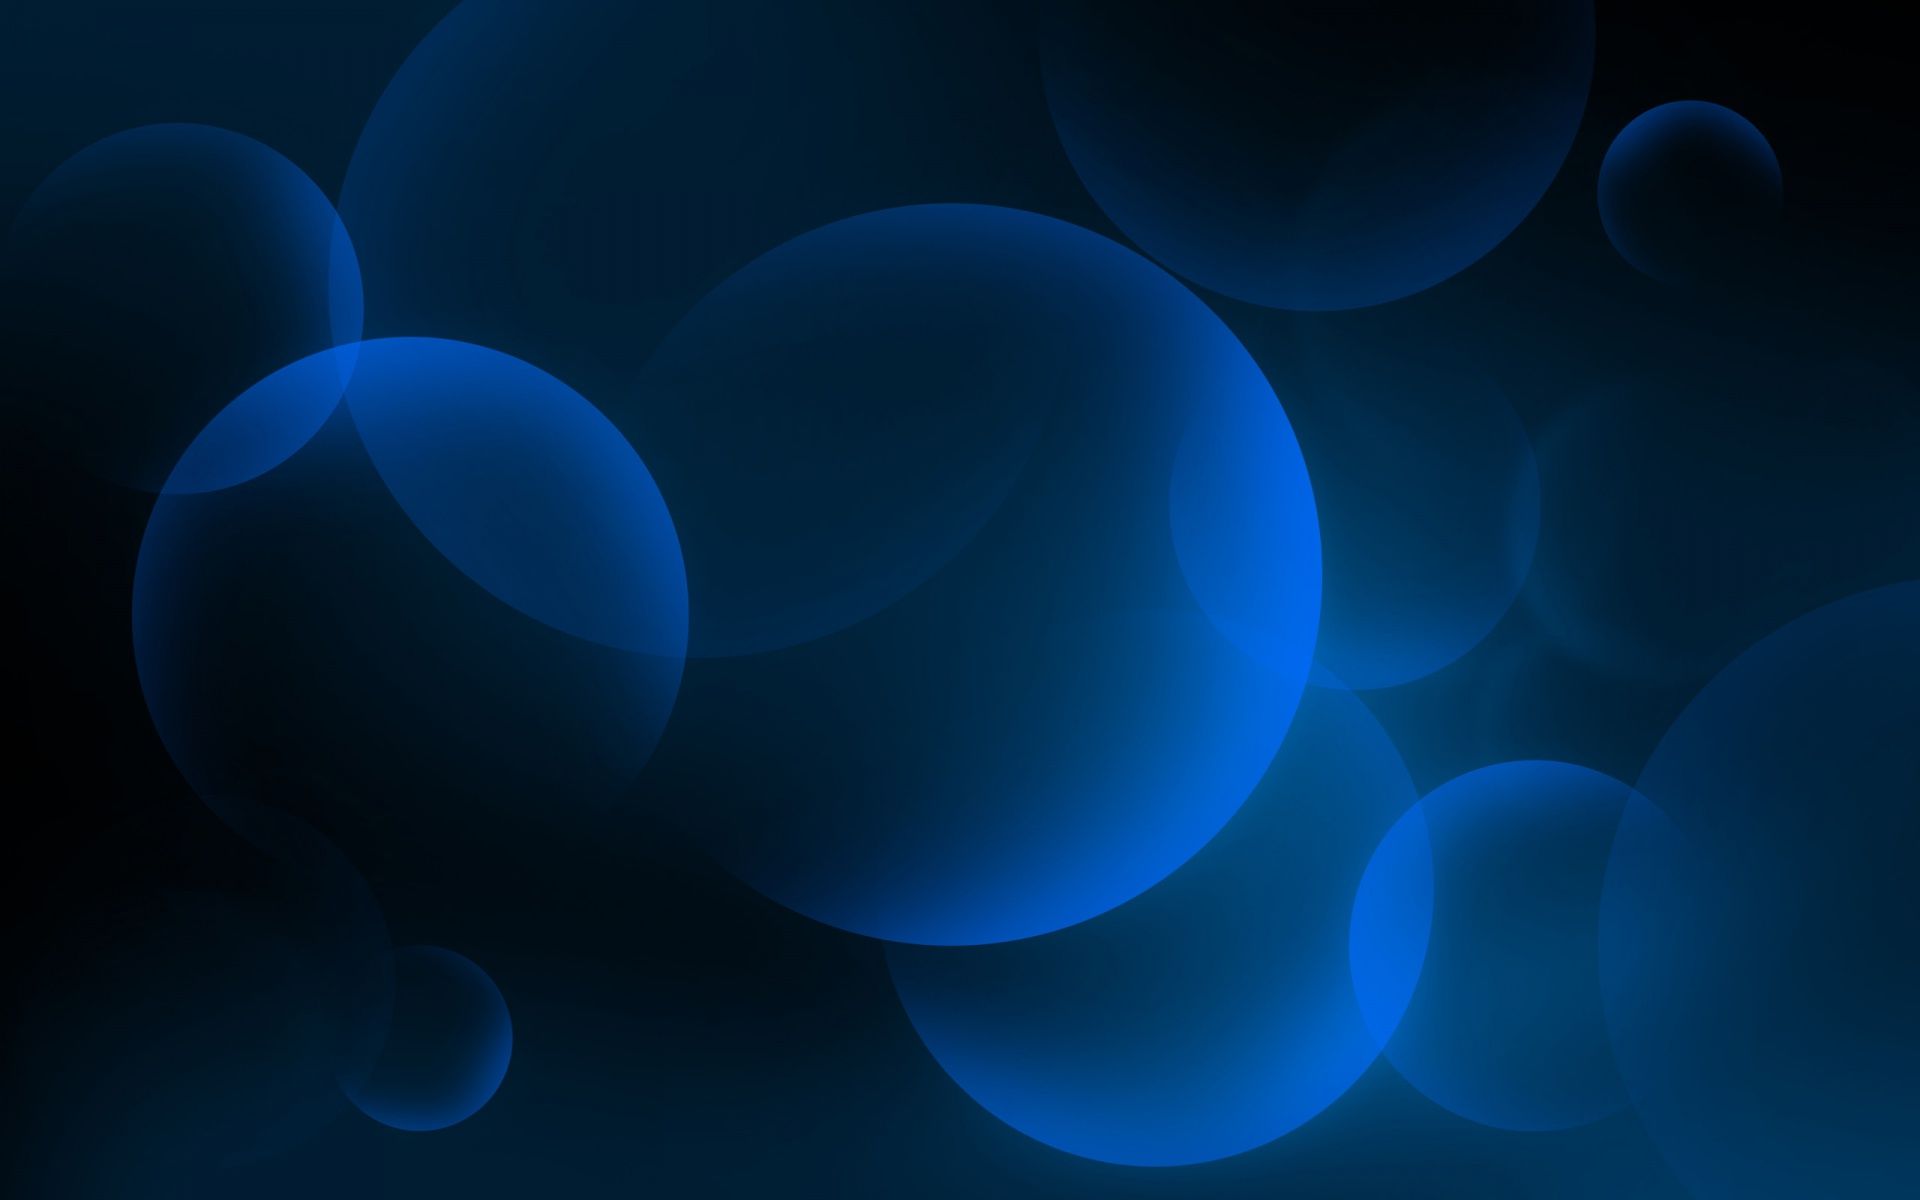 Dark and Blue Bubbles Wallpaper Free Dark and Blue Bubbles Background